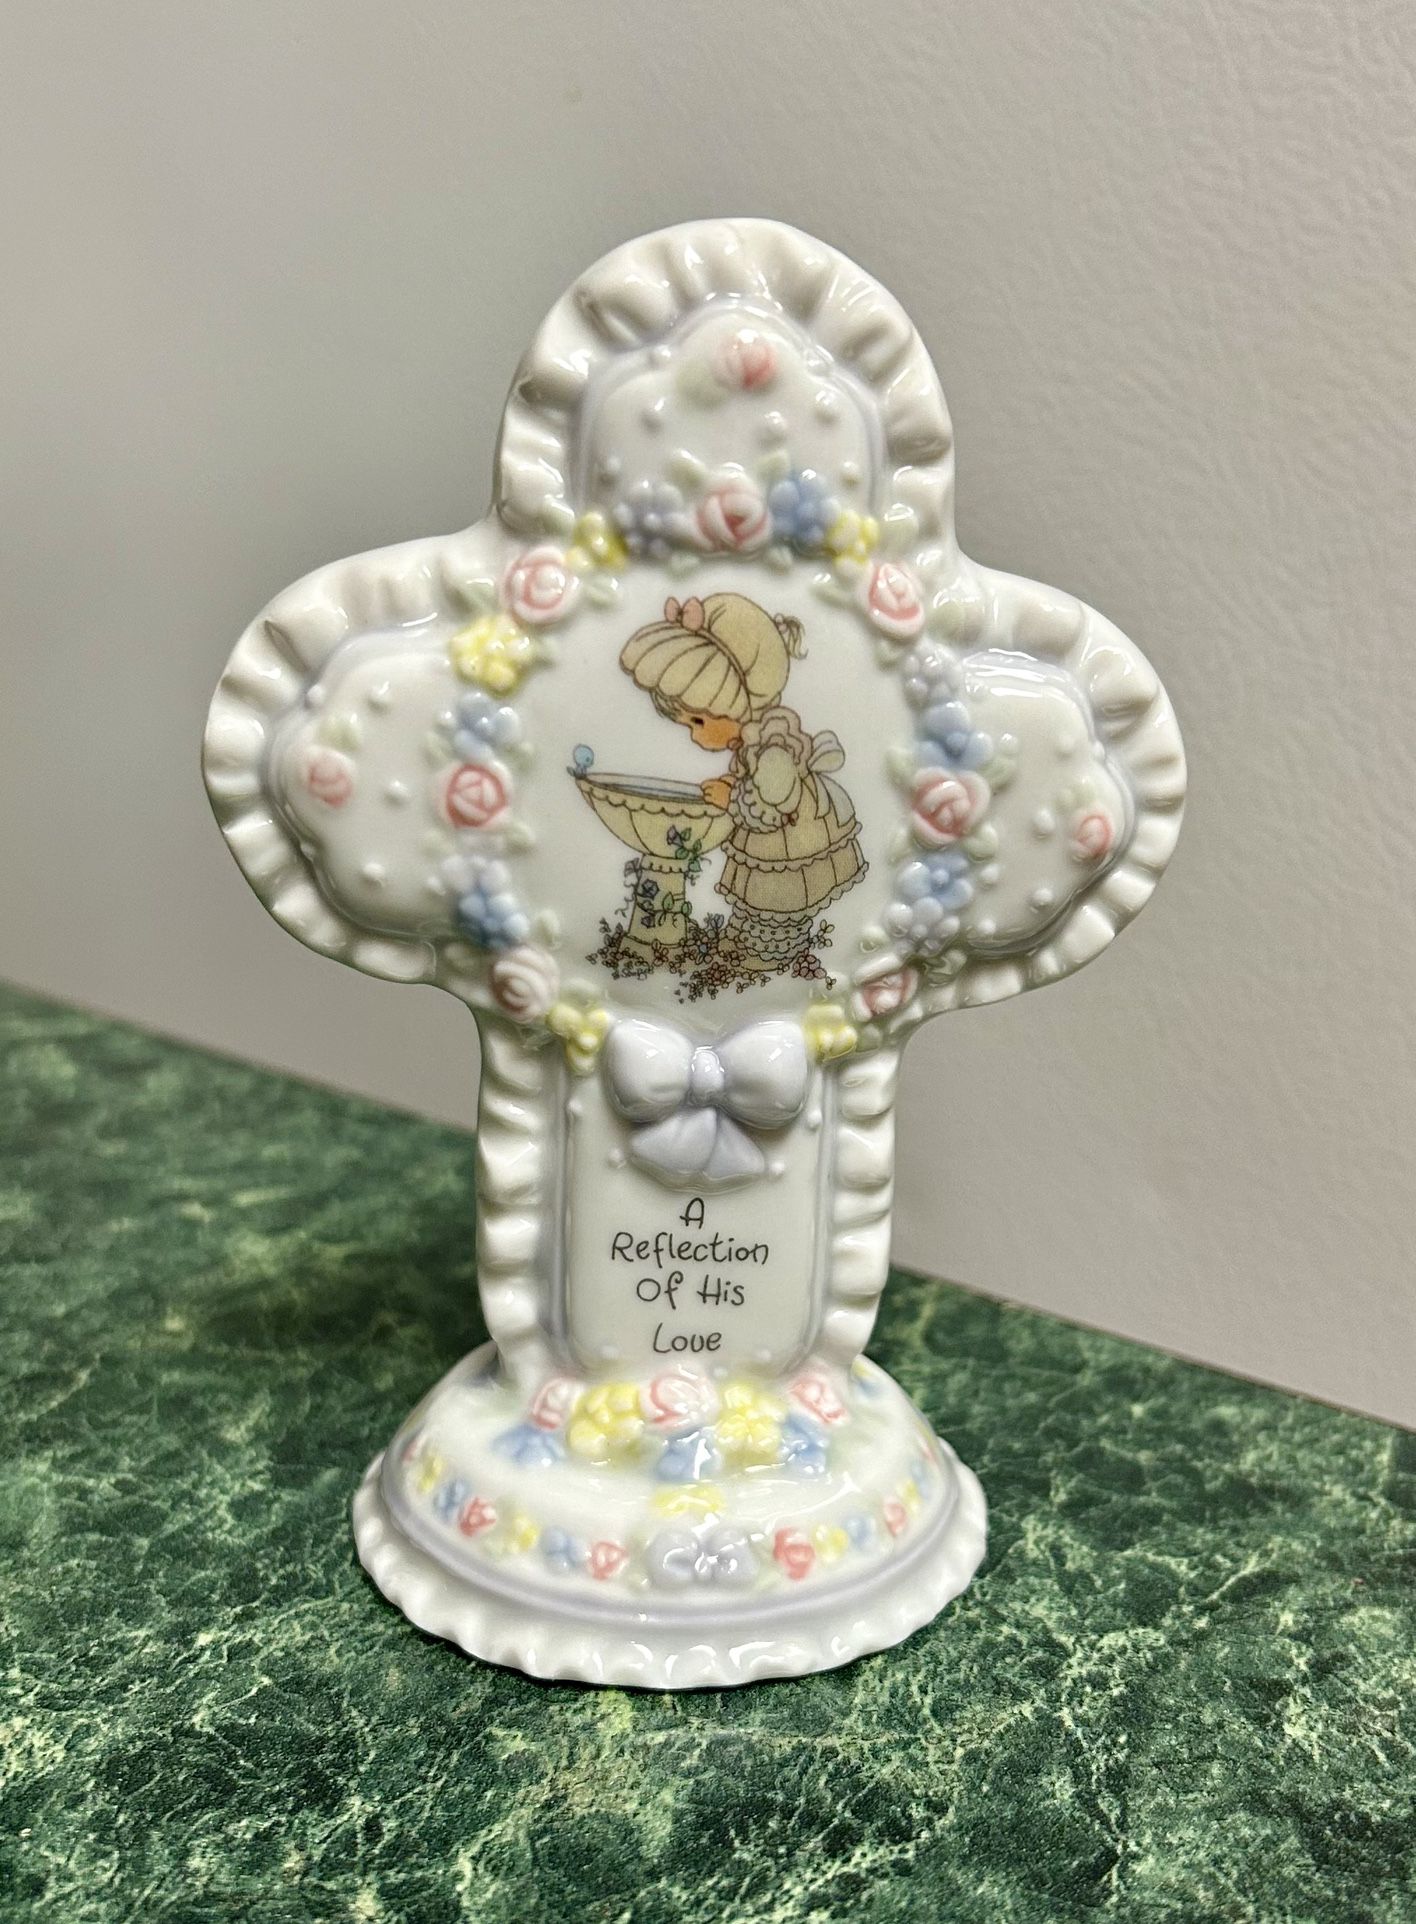 Enesco Precious Moments Collection Porcelain Cross Reflection of His Love Floral Flowers Vintage